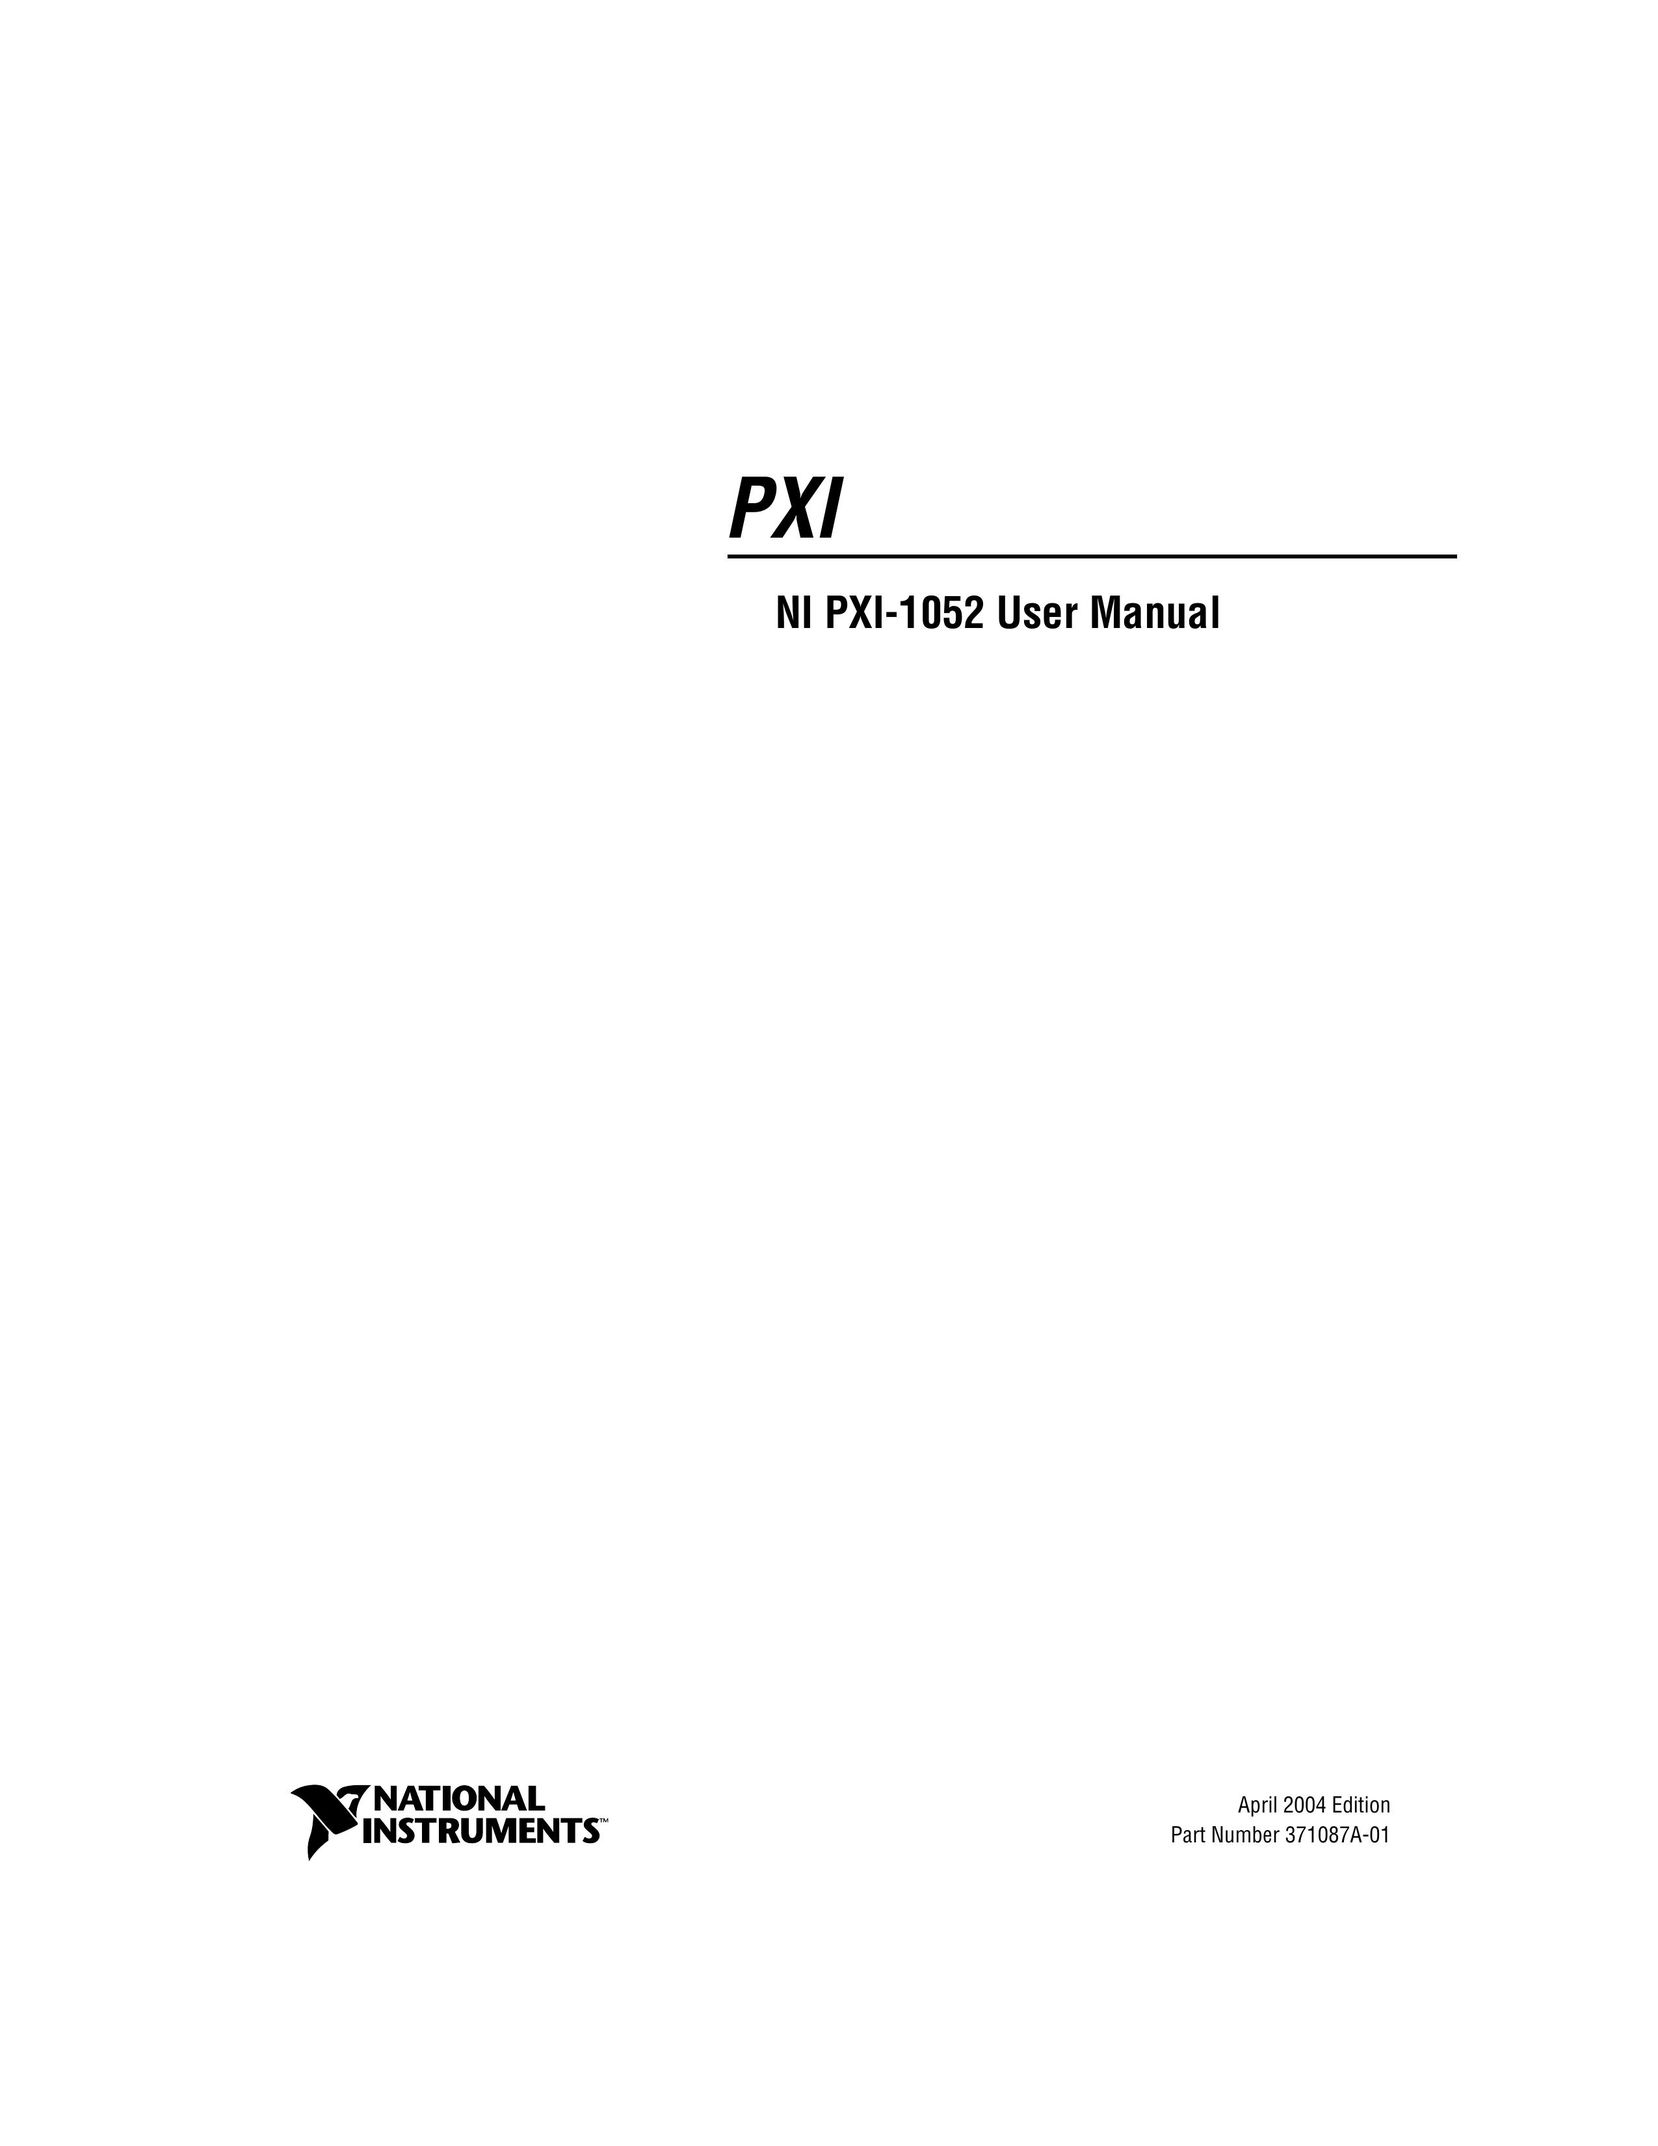 National Instruments PXI NI PXI-1052 Switch User Manual